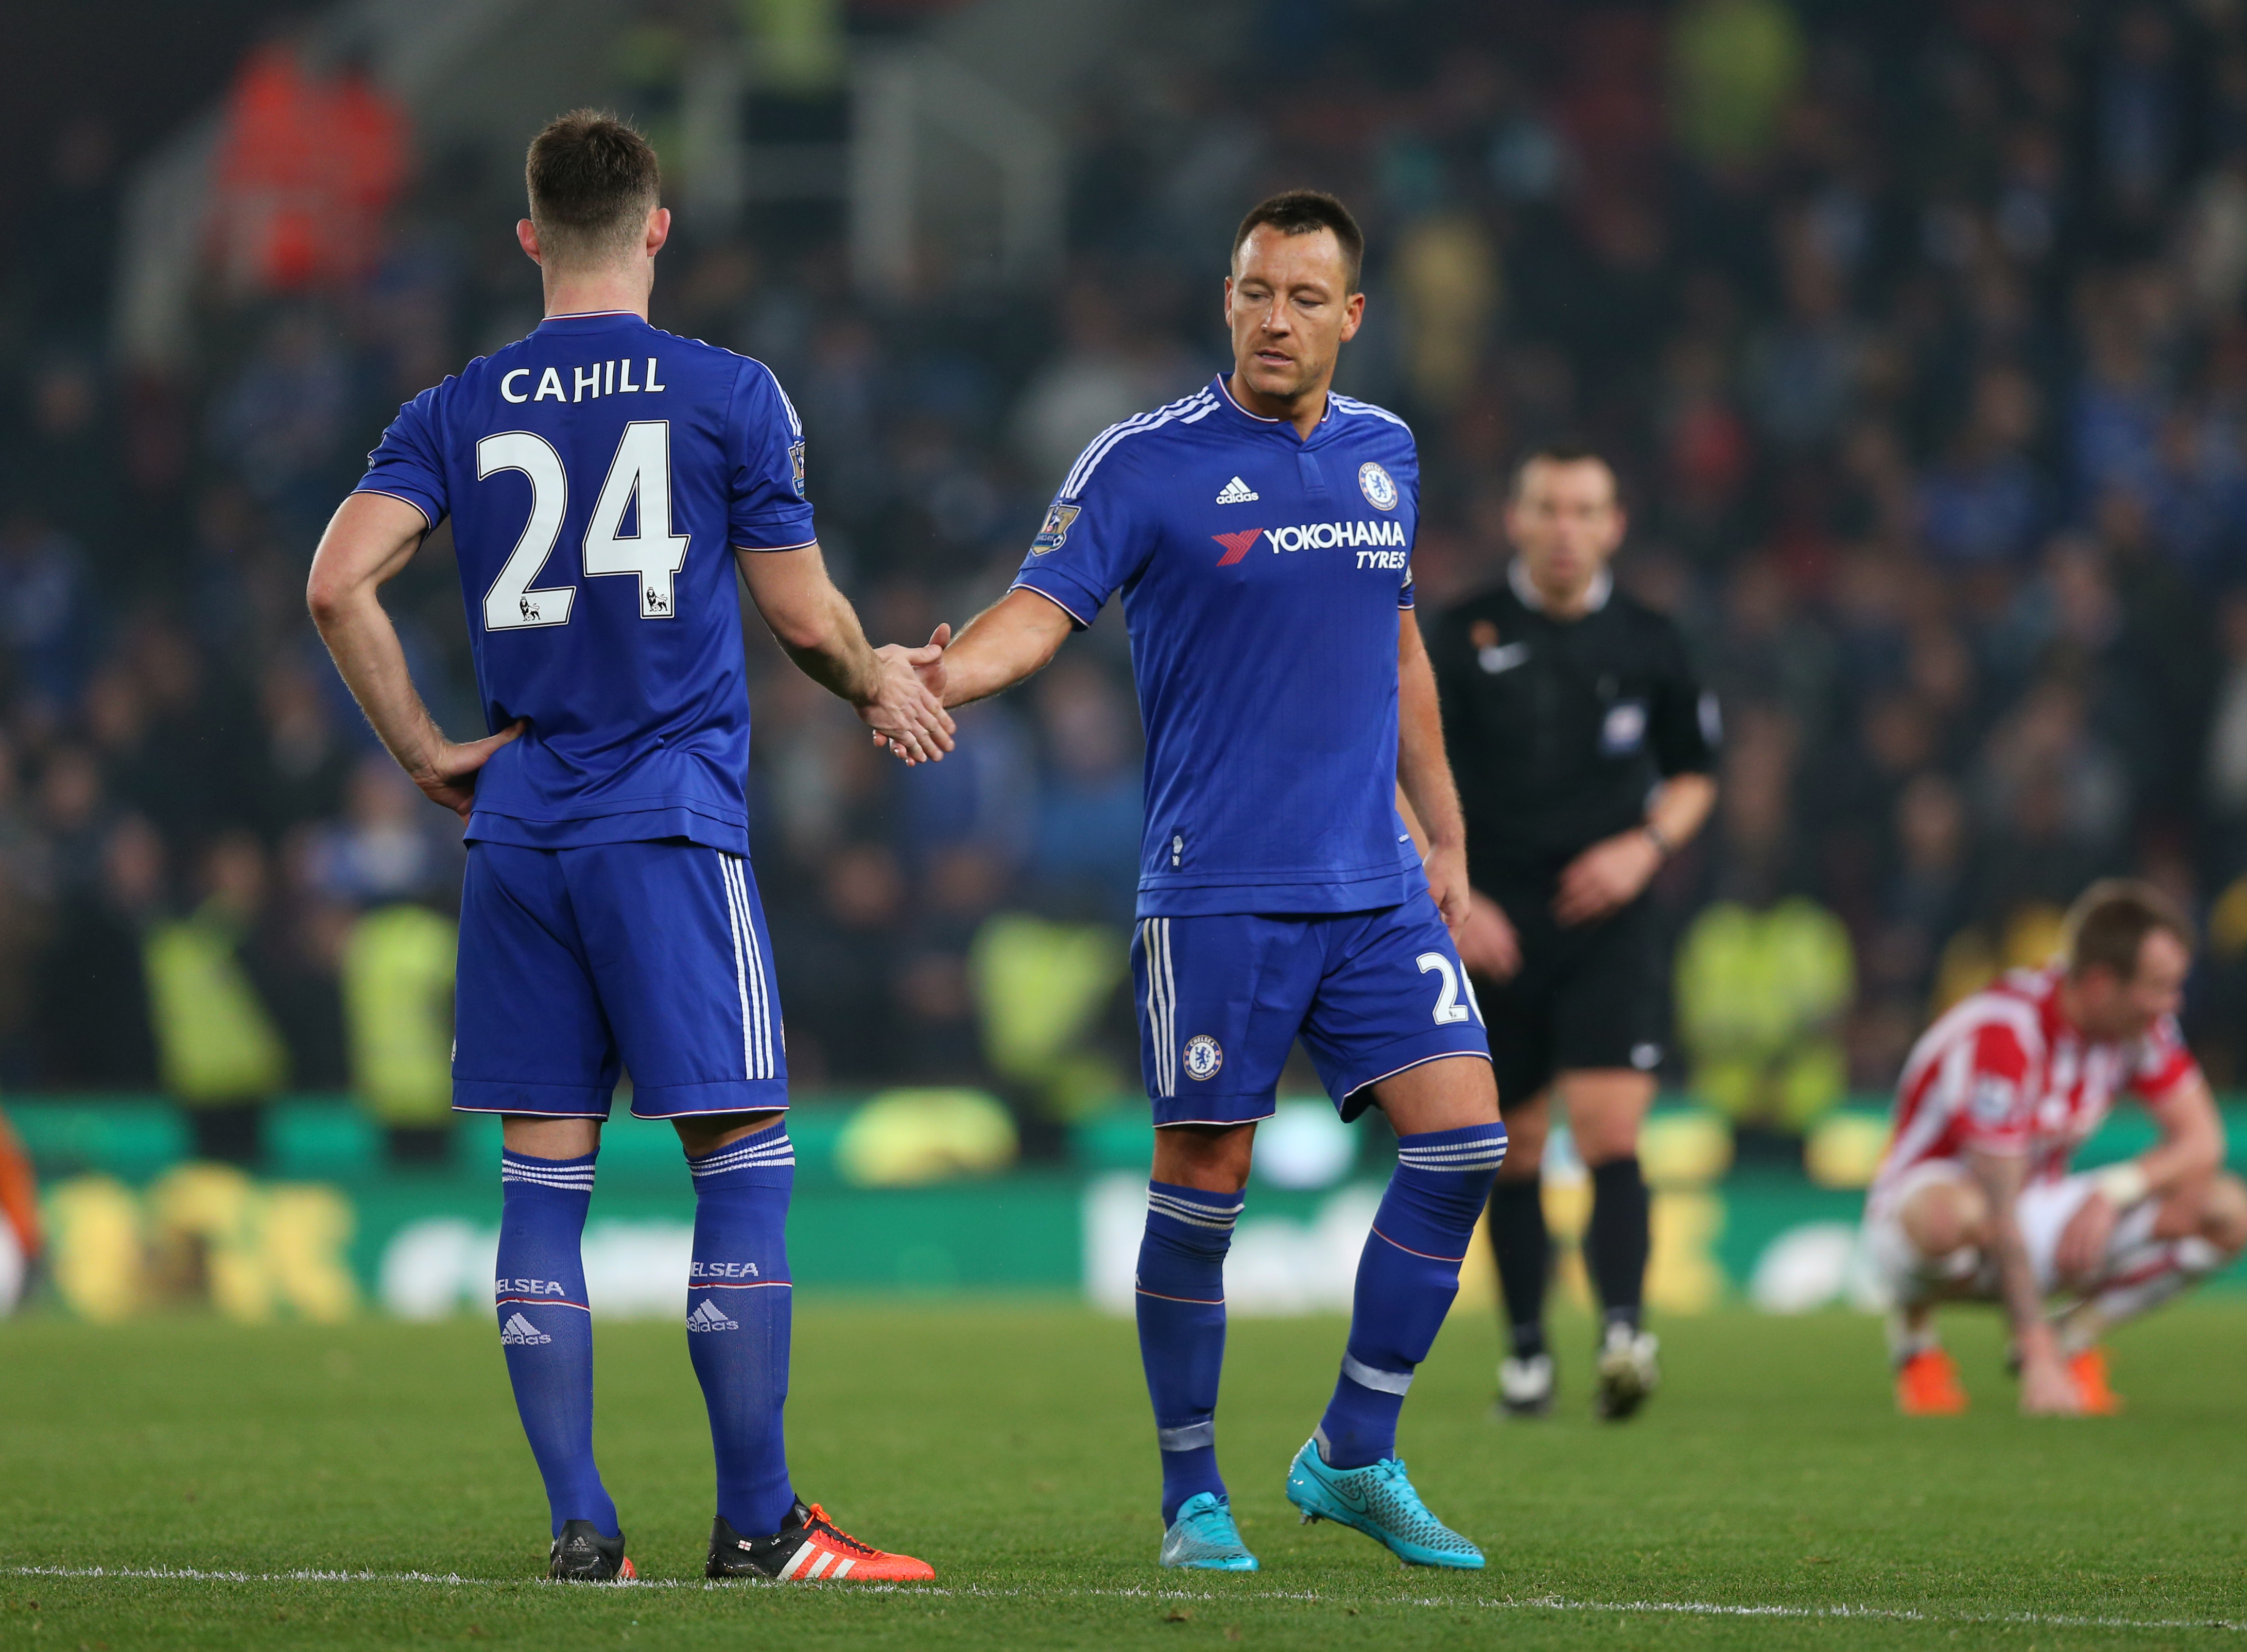 Holders Chelsea crash out with Arsenal in League Cup